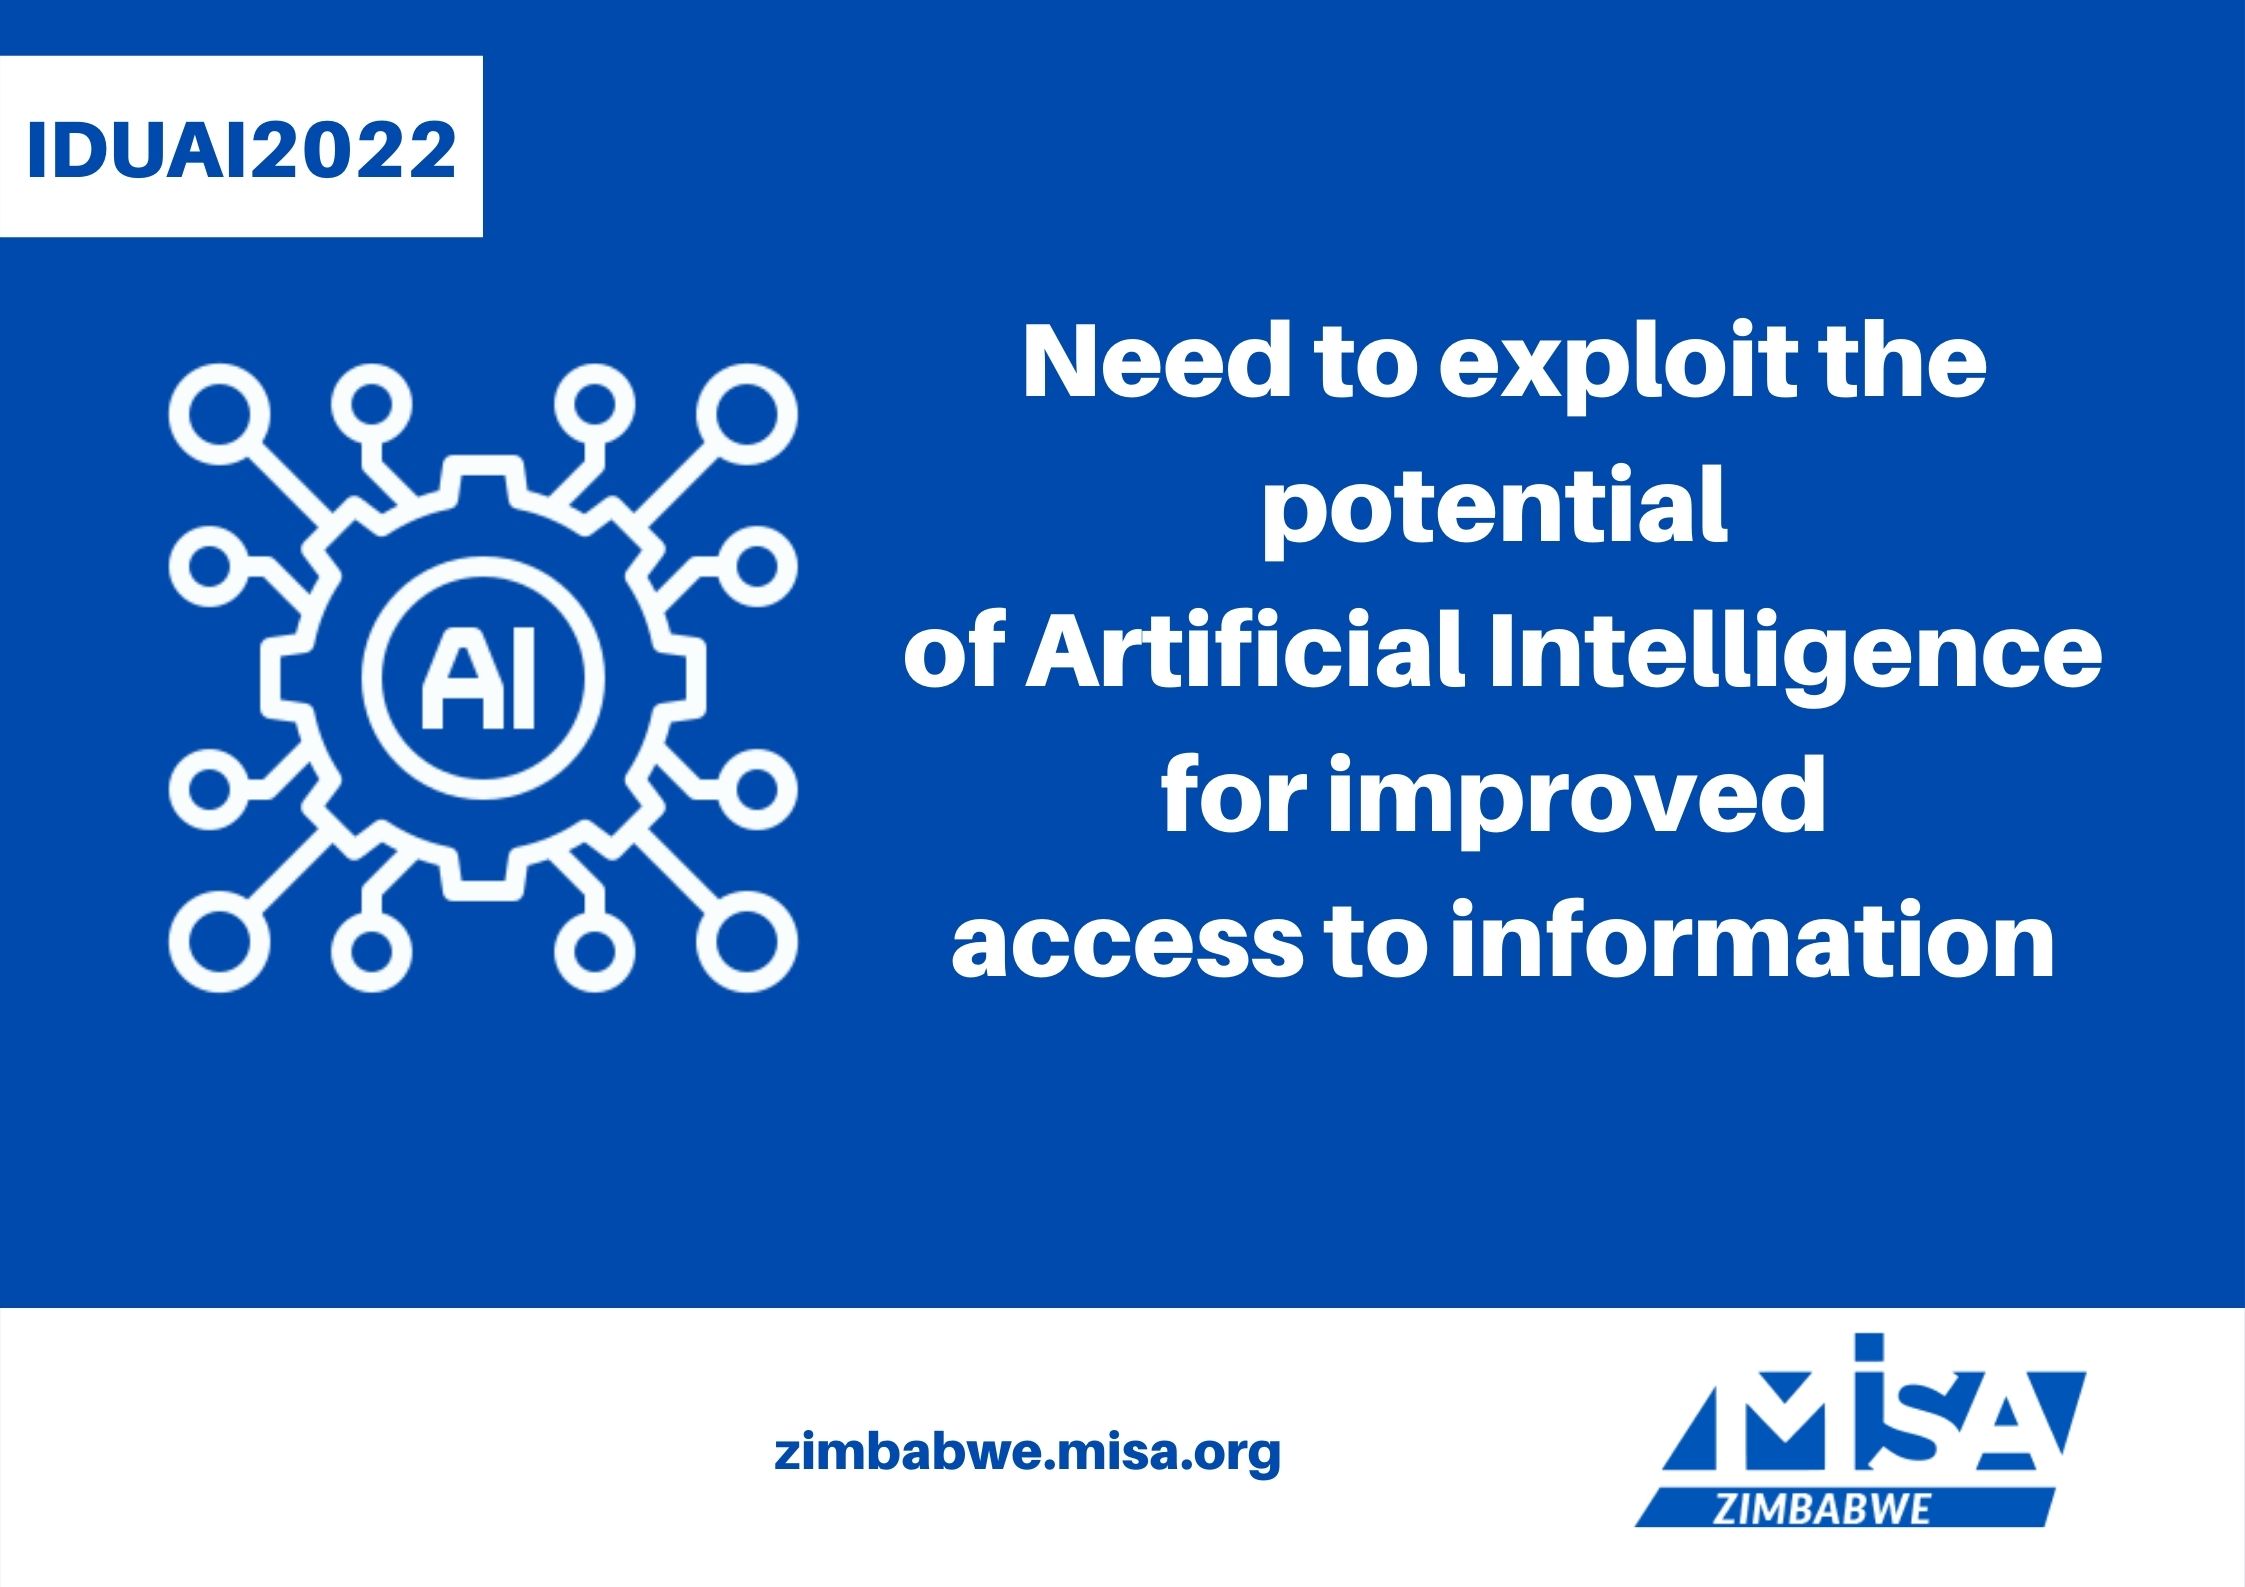 Need to exploit the potential of Artificial Intelligence for improved access to information